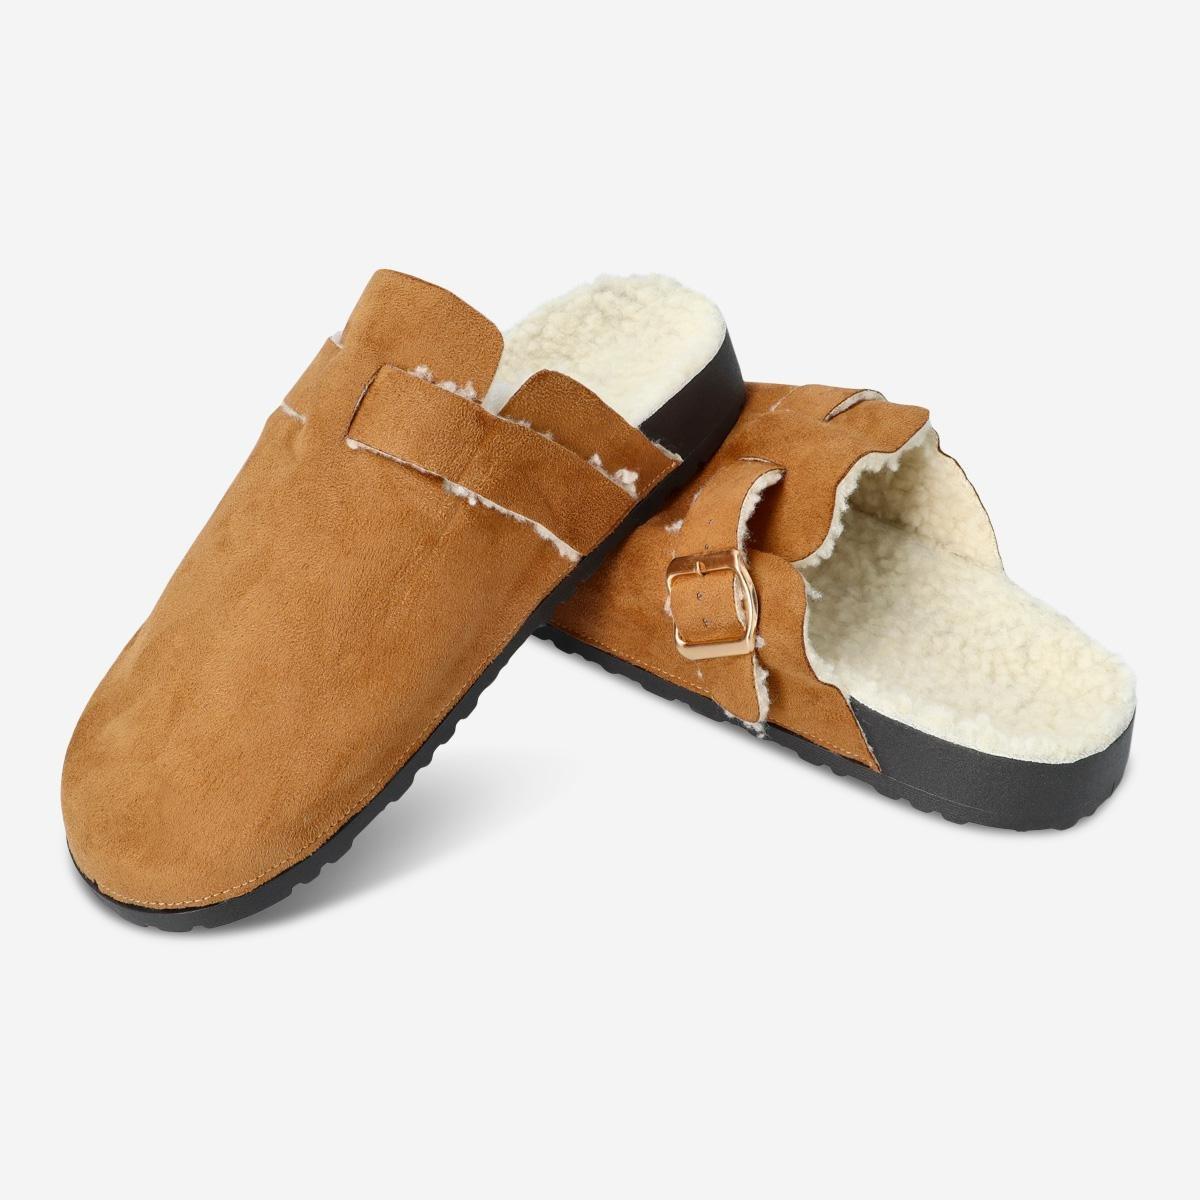 Brown slippers. 36-37